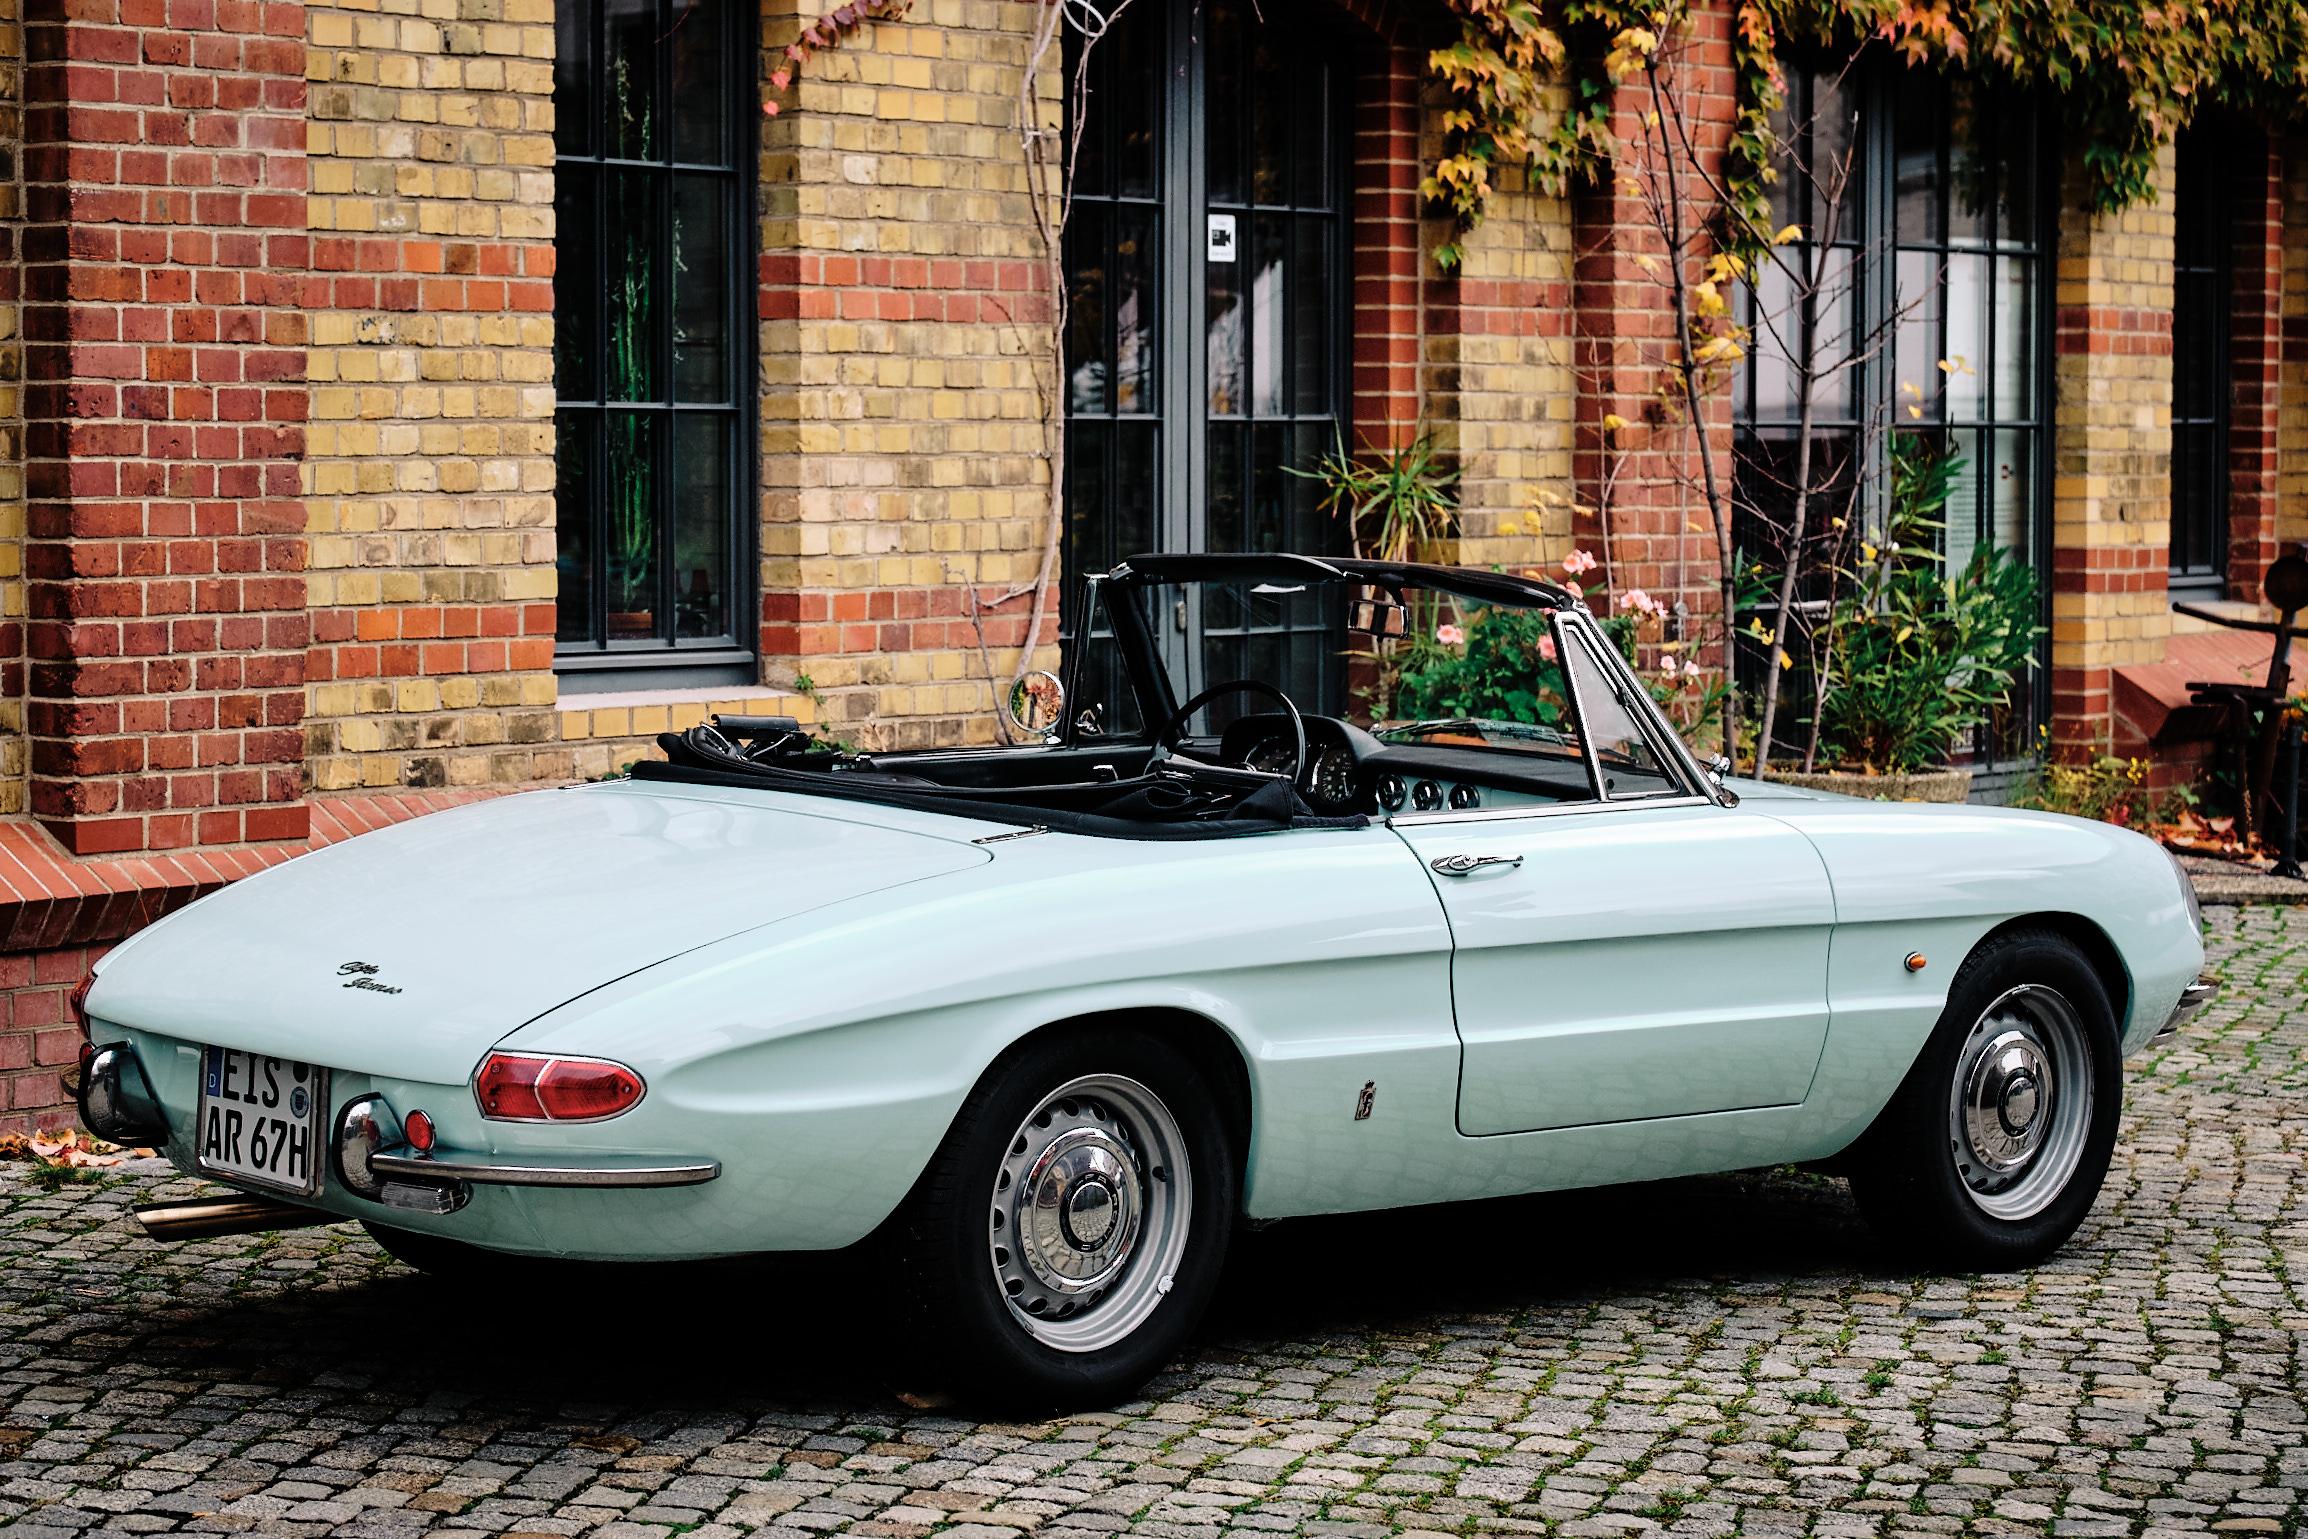 For sale is a rare 1967 Alfa Spider Duetto, accompanied by its original German registration documents. This gem underwent an extensive restoration process in 2013/2014, including a meticulous frame-off restoration and sandblasting of the body. The